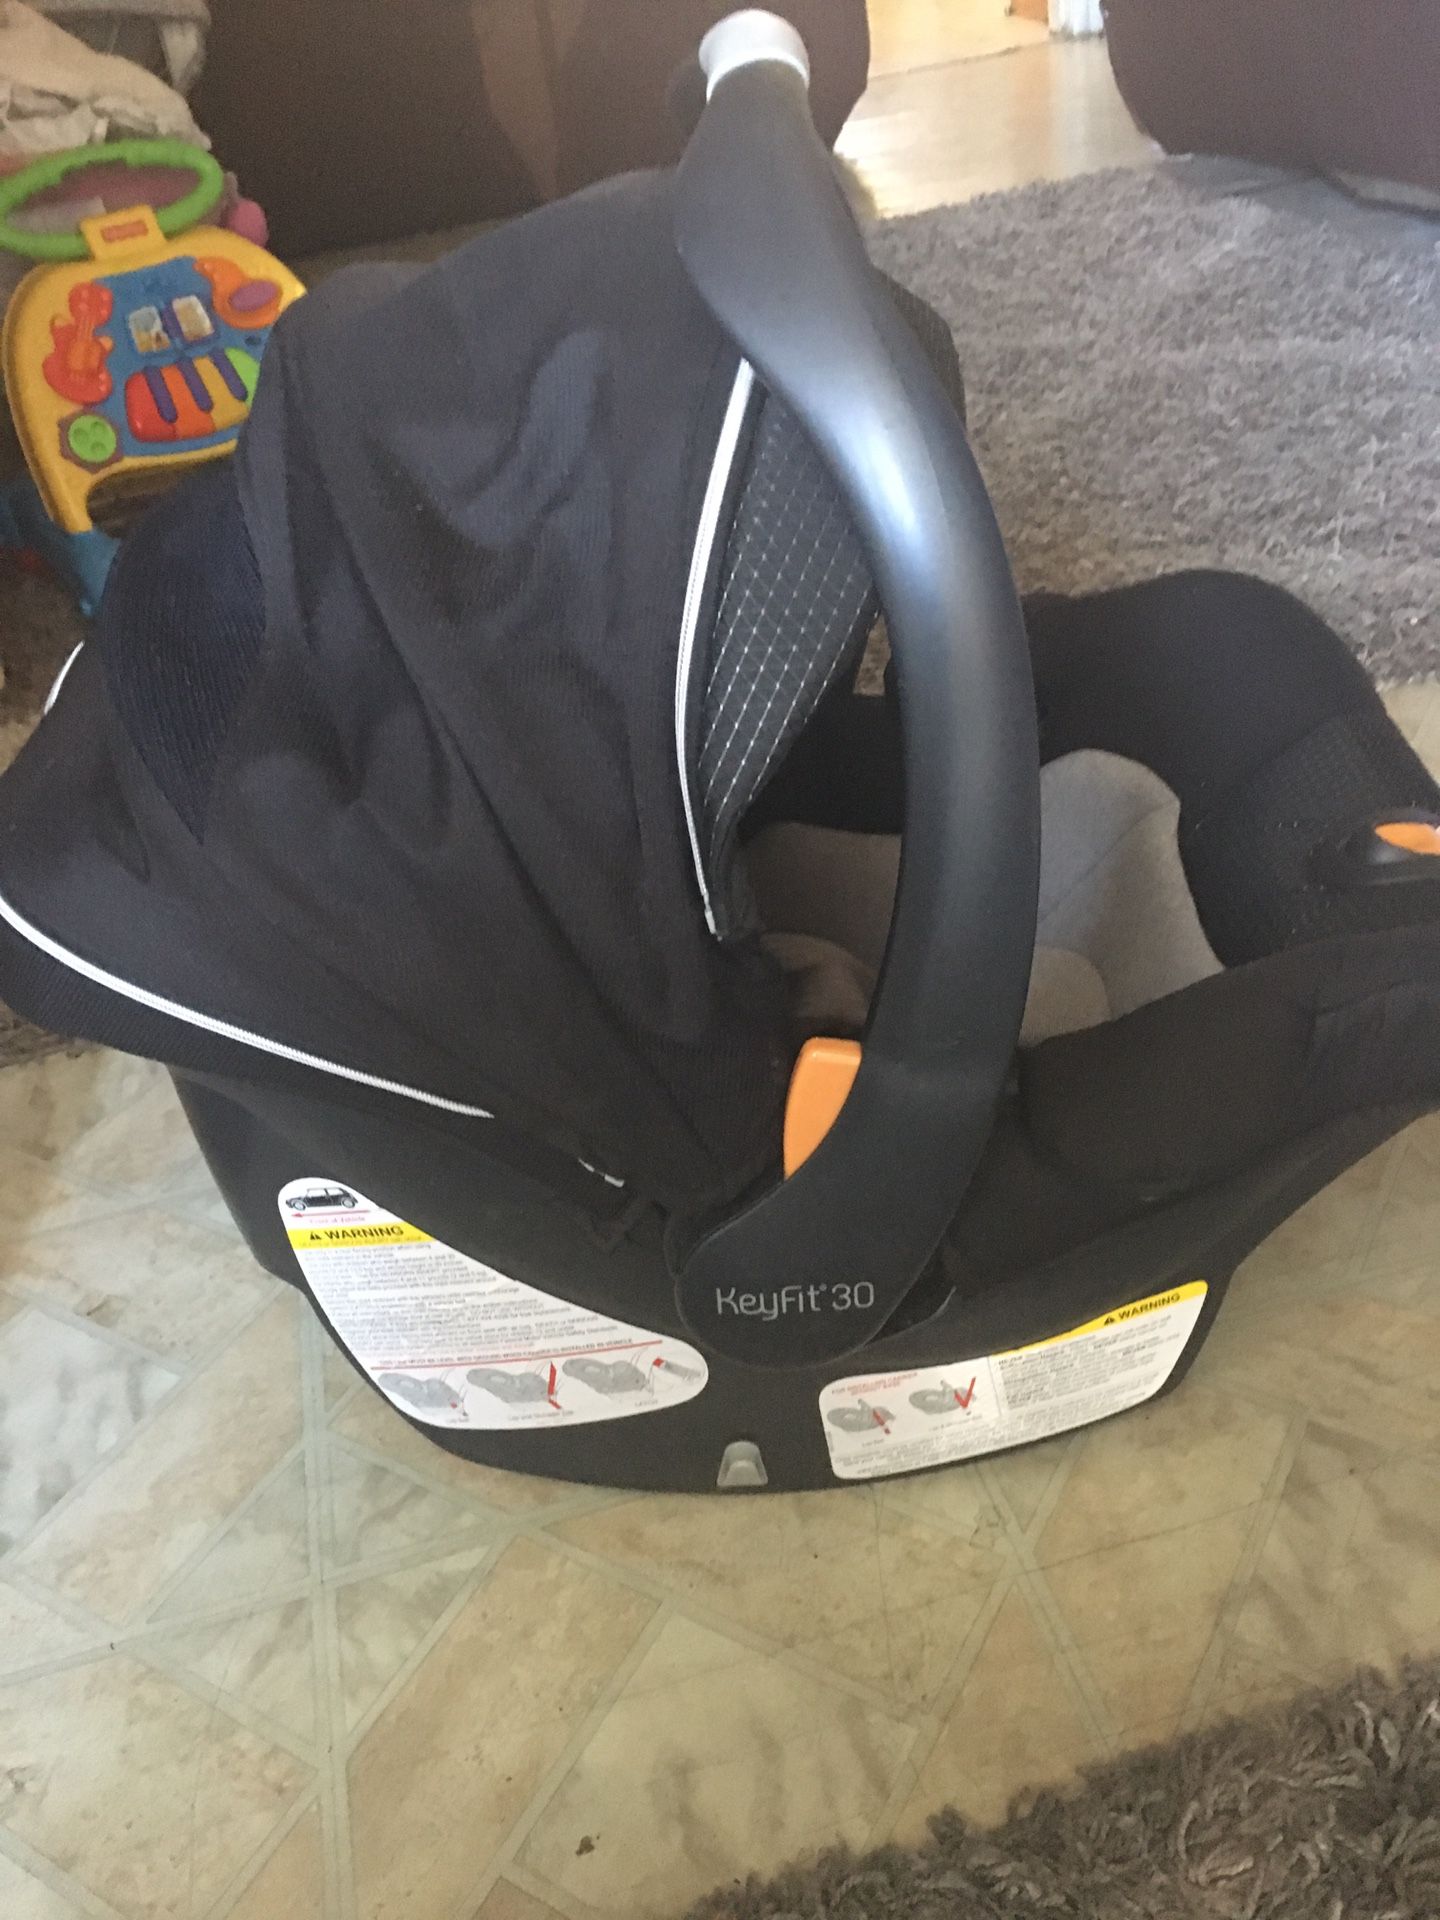 Chico keyfit 30 car seat and stroller frame